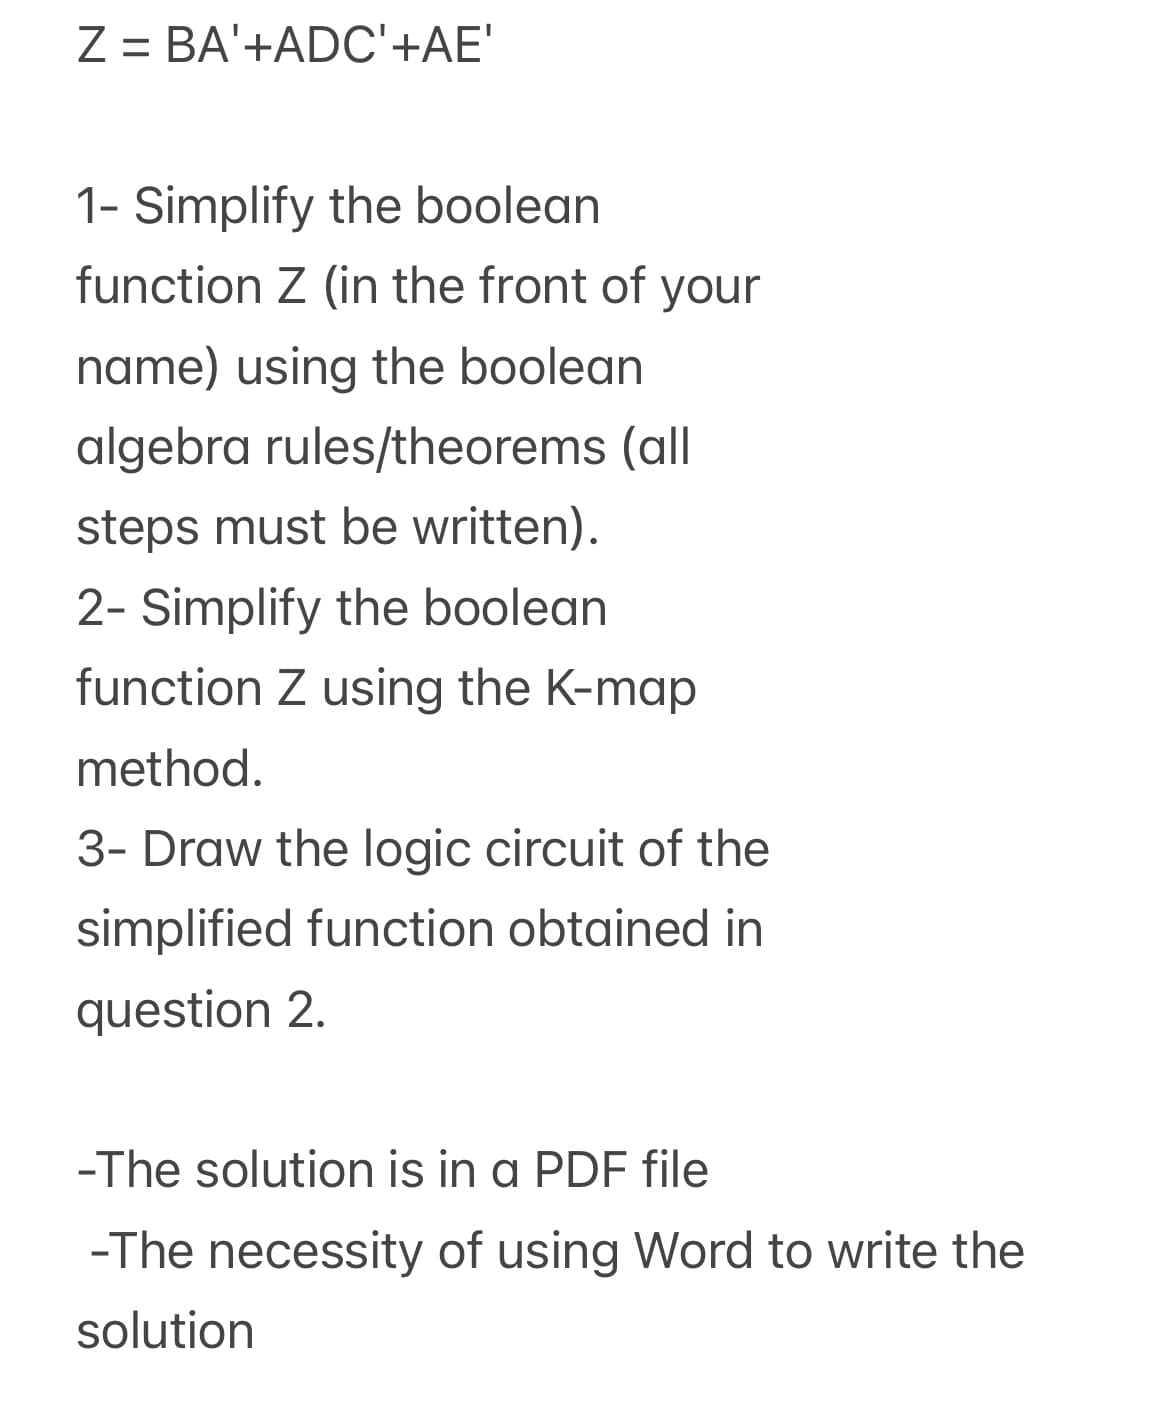 Z = BA'+ADC'+AE'
1- Simplify the boolean
function Z (in the front of your
name) using the boolean
algebra rules/theorems (all
steps must be written).
2- Simplify the boolean
function Z using the K-map
method.
3- Draw the logic circuit of the
simplified function obtained in
question 2.
-The solution is in a PDF file
-The necessity of using Word to write the
solution
